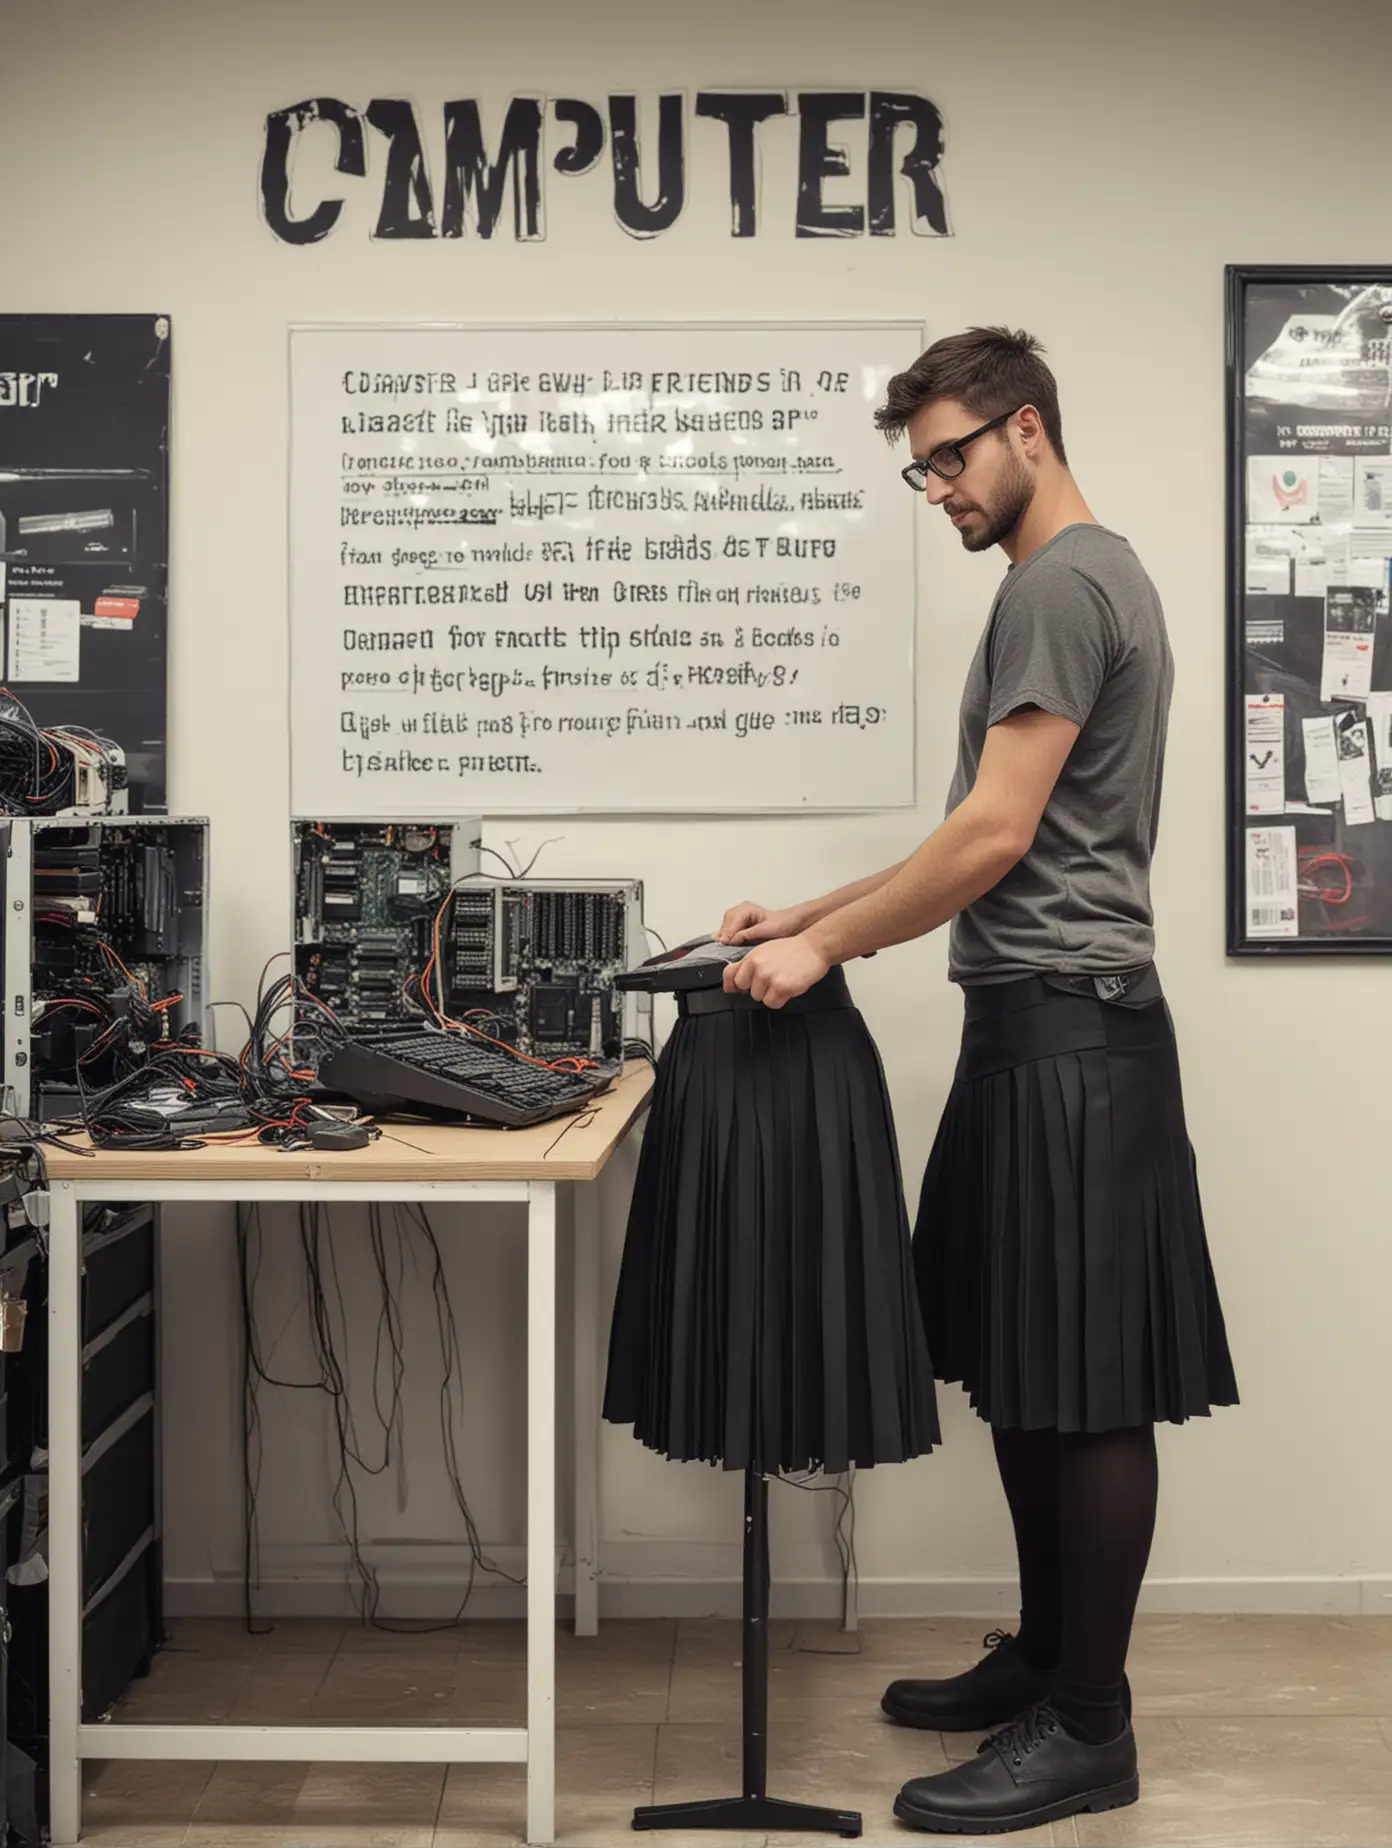 Create an image of a man wearing a black pleated women's skirt. He is assembling a computer from parts in a computer shop. On the wall is a sign that says (Computer for my friends)